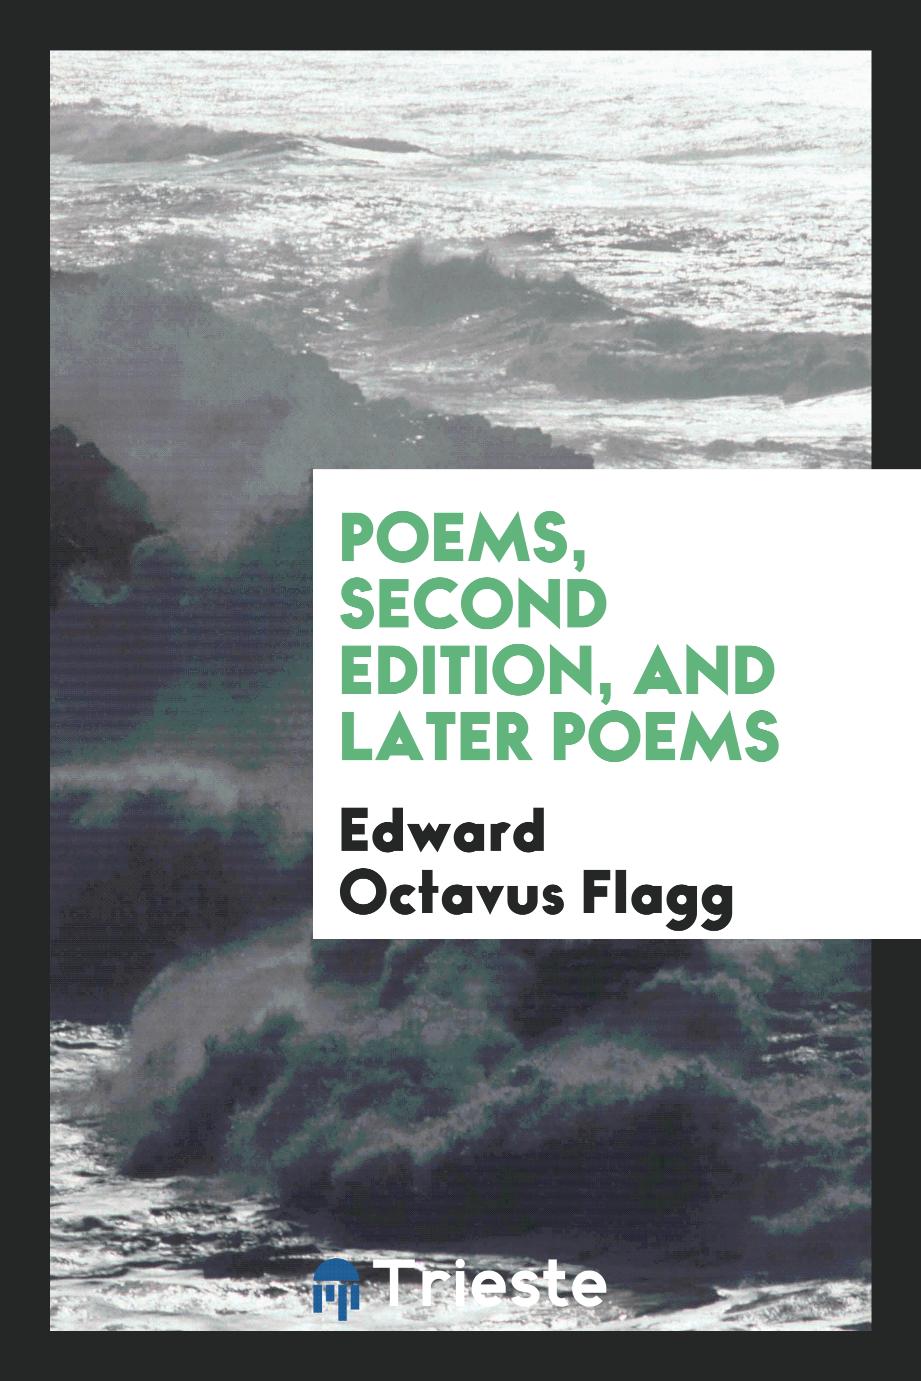 Poems, second edition, and later poems